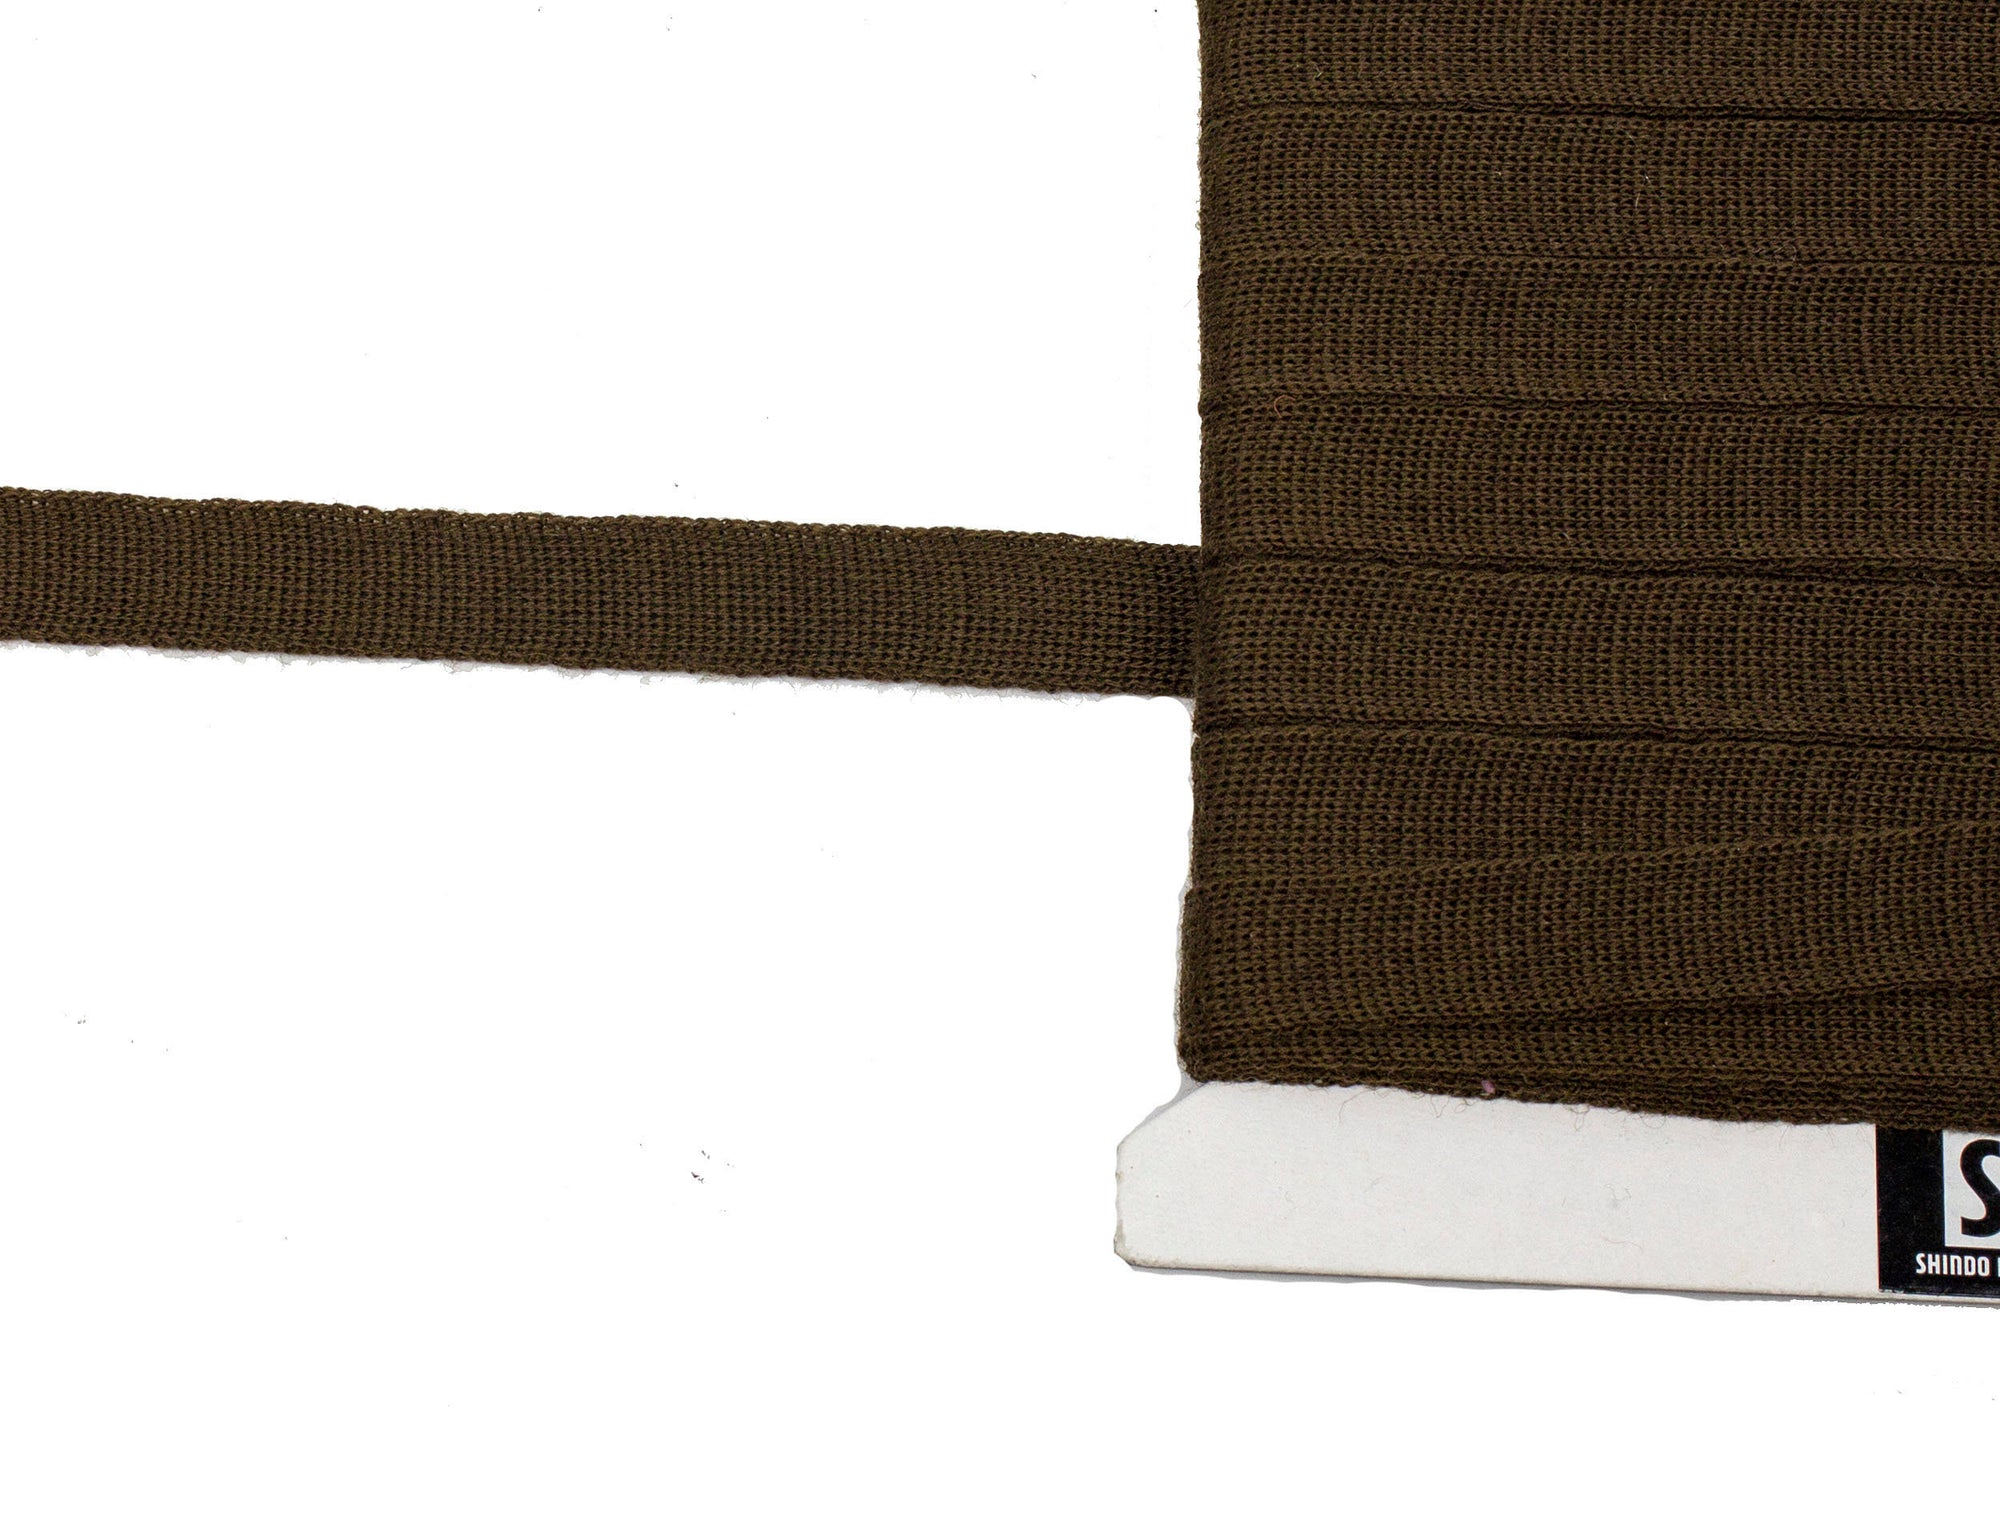 Wool Knit Binder Shindo 100% Wool (SIC-2004) Medium Brown Color 31 - 15 mm  Wide - Sold by the Yard